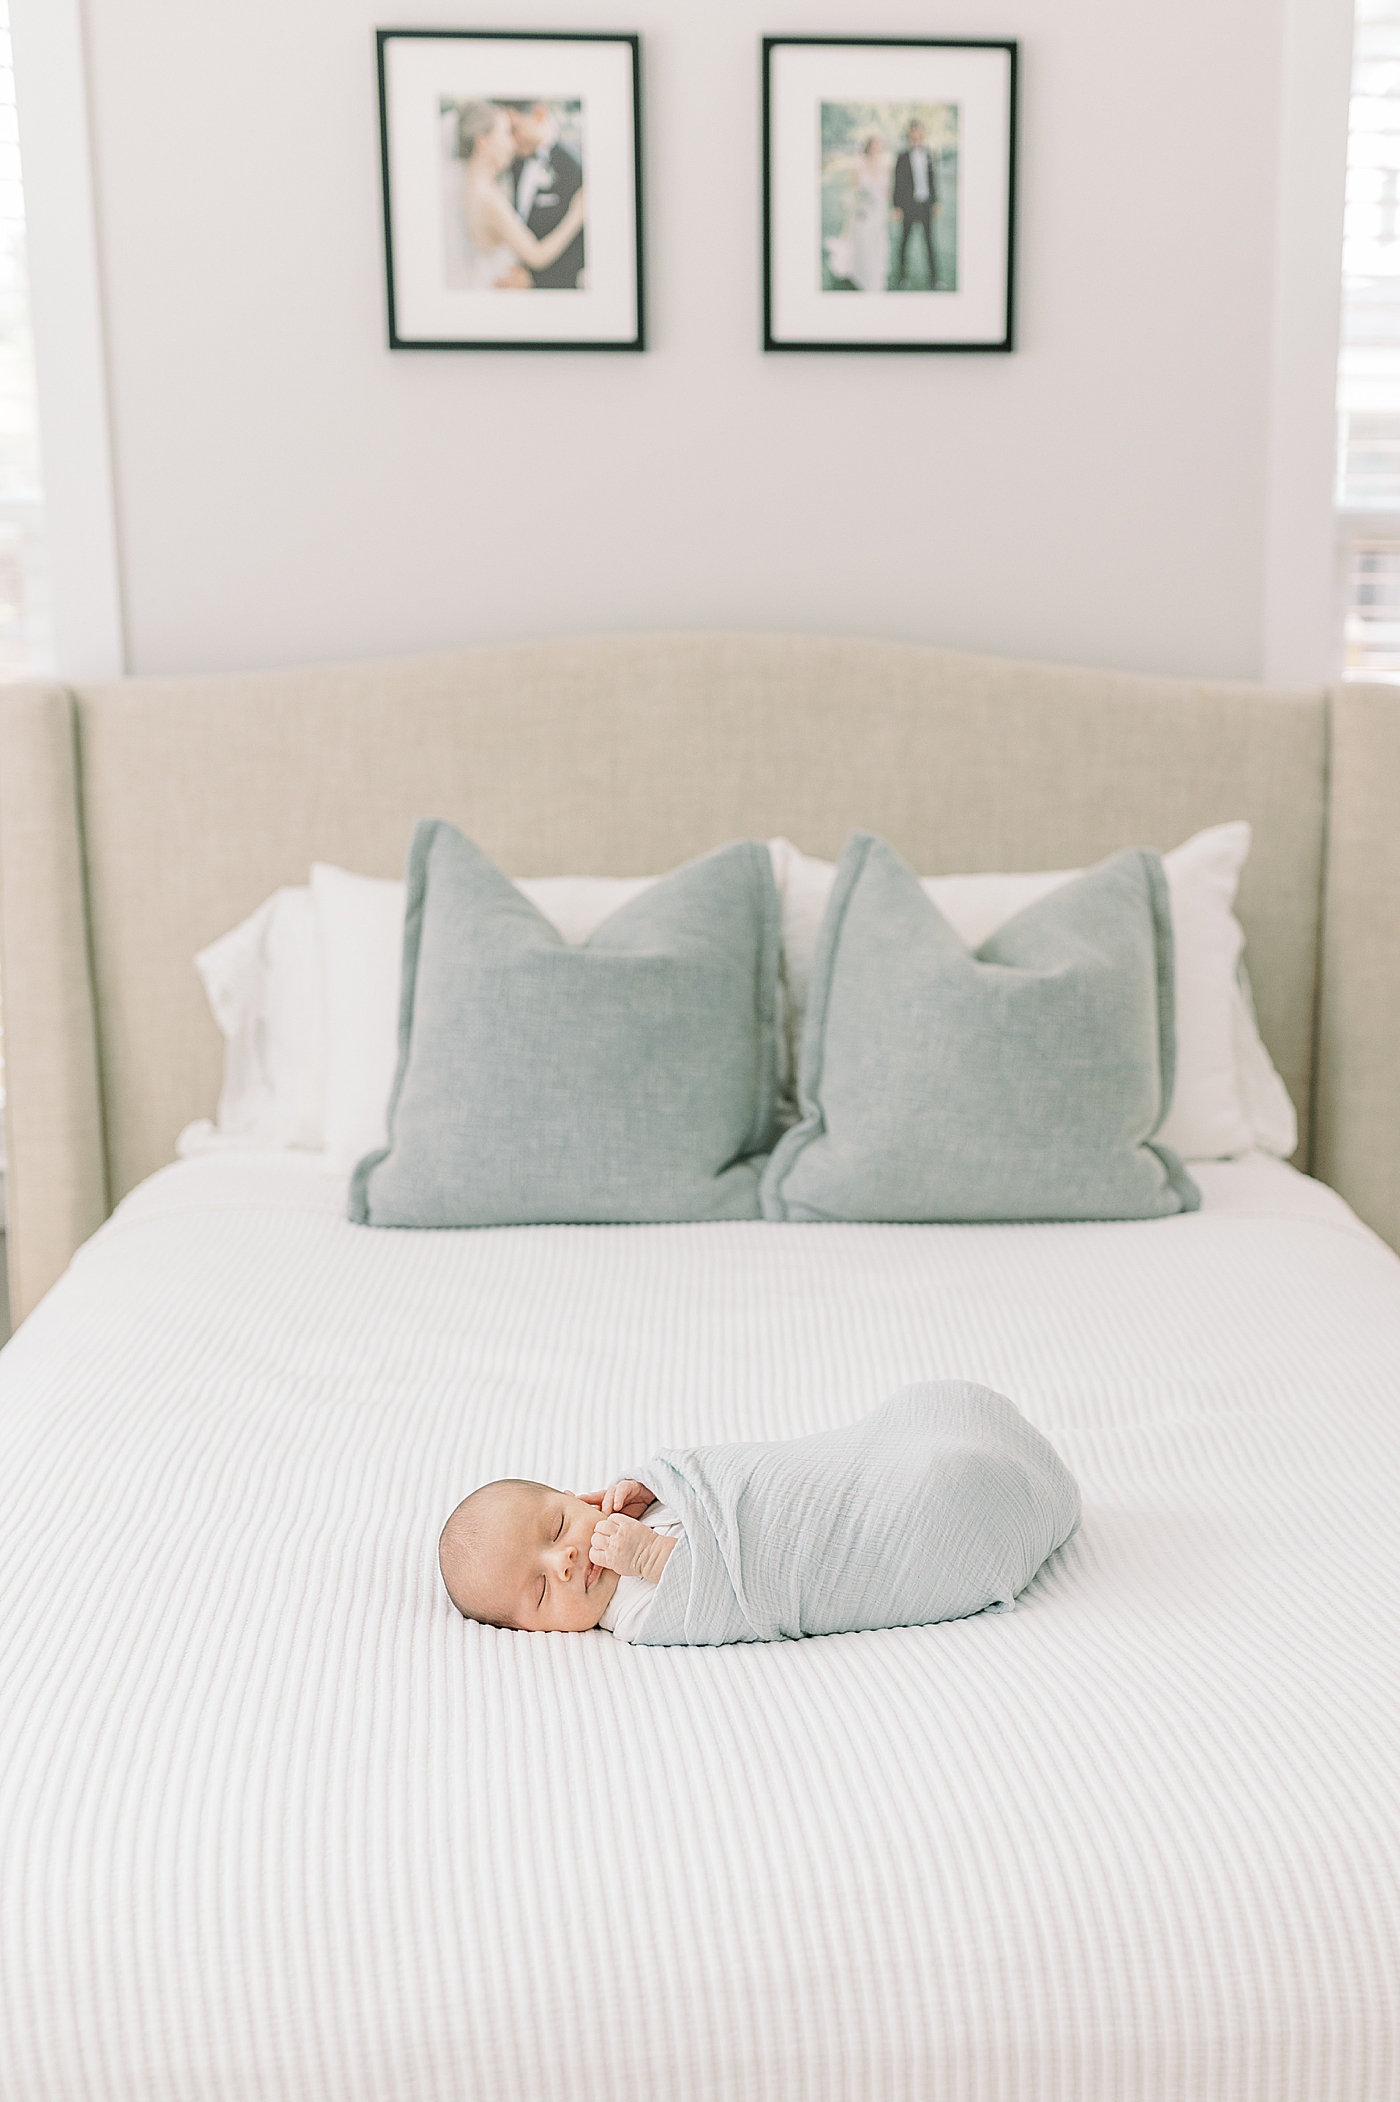 Newborn baby sleeping on a bed during lifestyle newborn photos | Image by Caitlyn Motycka